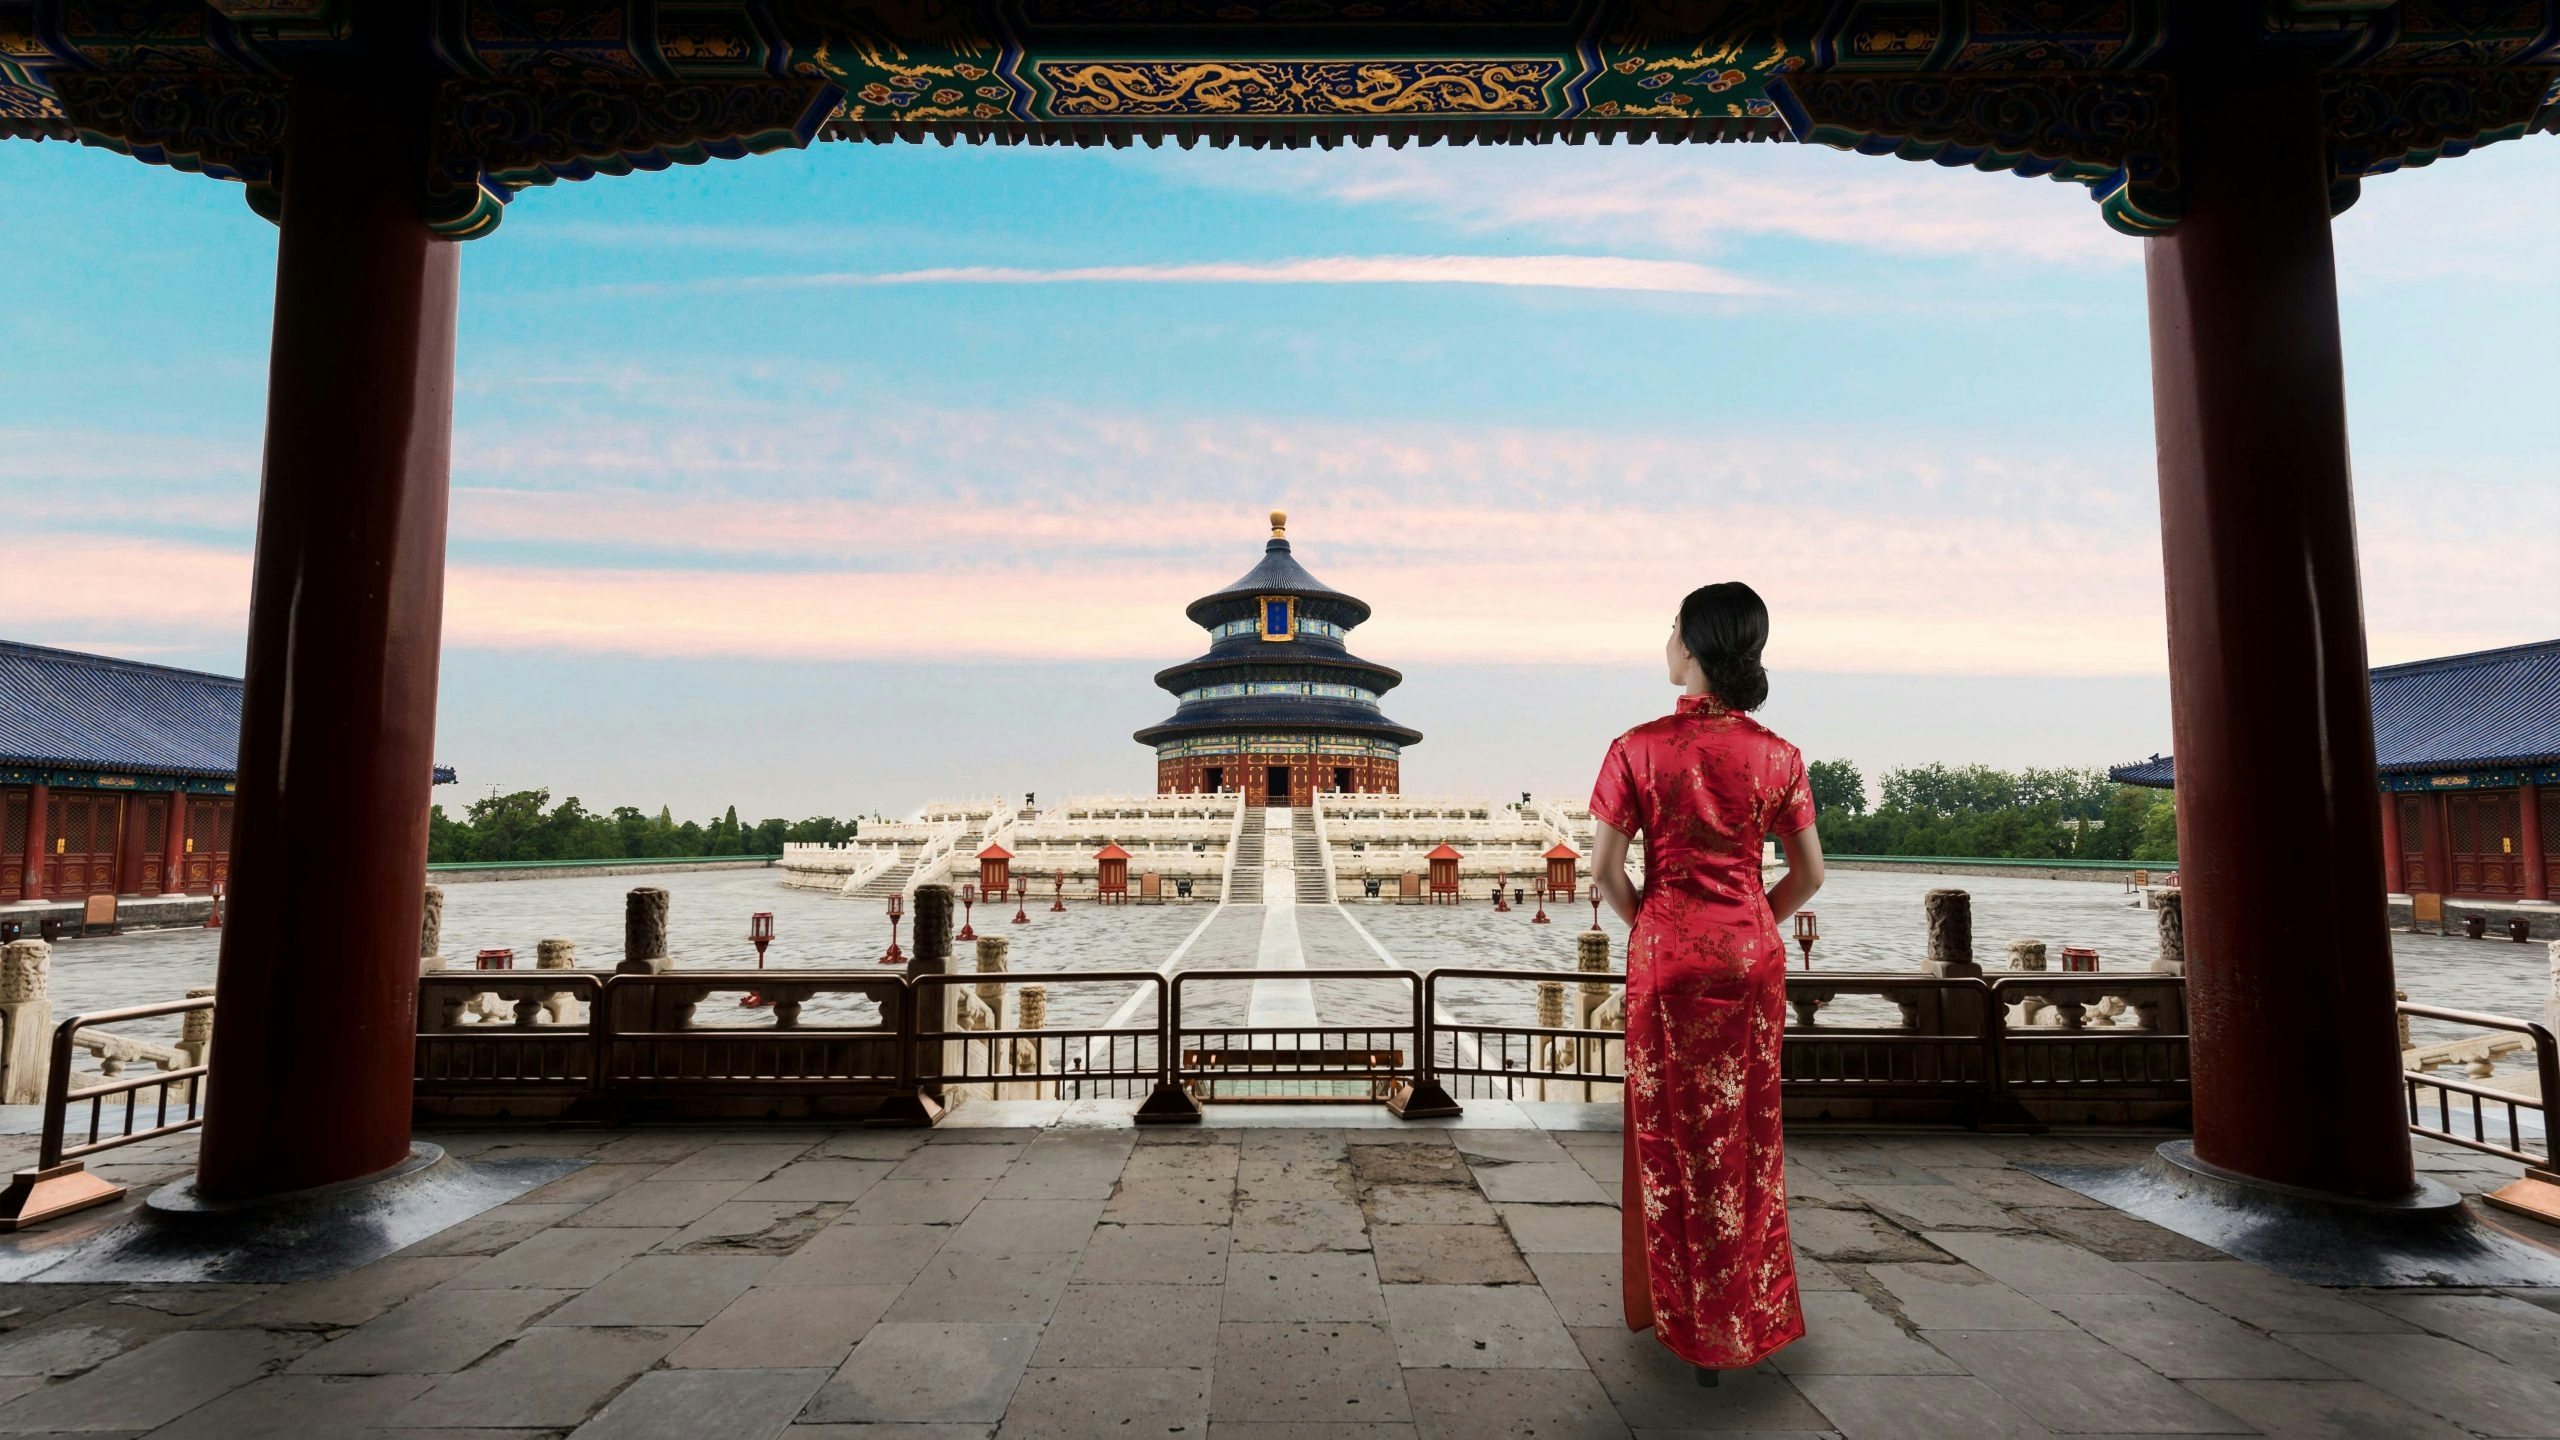 China’s reopened borders present a huge tourism opportunity — so big, in fact, that Beijing could surpass Paris as the world’s most powerful city destination by 2032. Photo: Shutterstock 